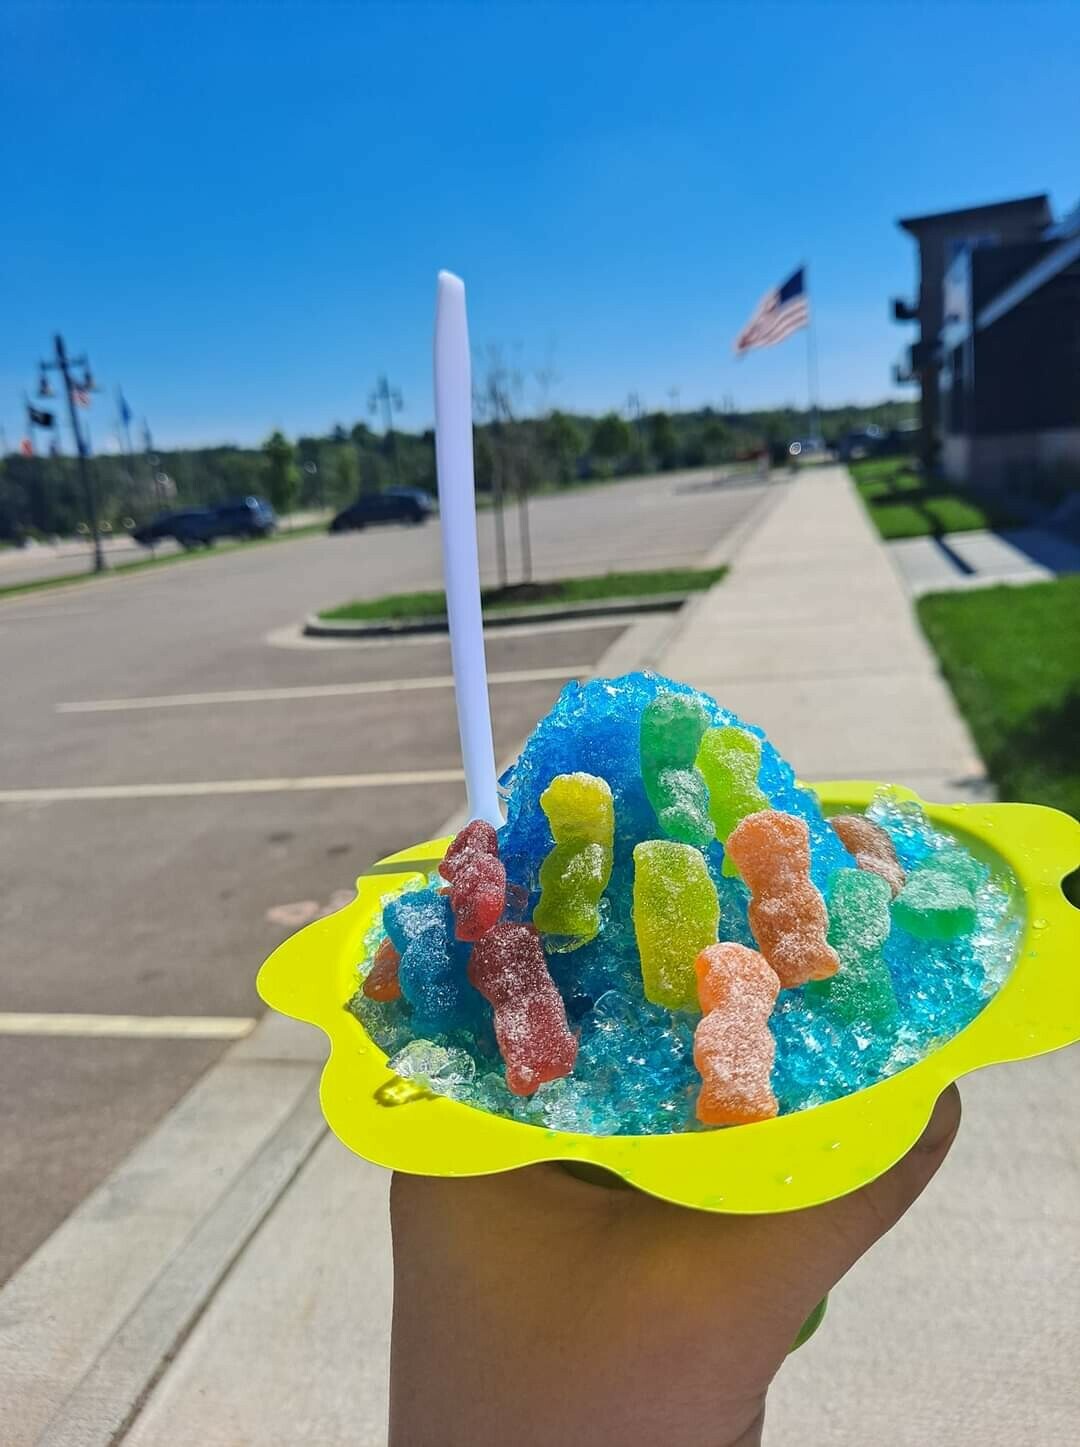 COLORFUL CONES. 44 Below in River Prairie is now offering snow cones, a delectable variation of shaved ice with flavored sugar syrup, available in grape, blue raspberry, and lemon lime flavors. (Submitted photo)